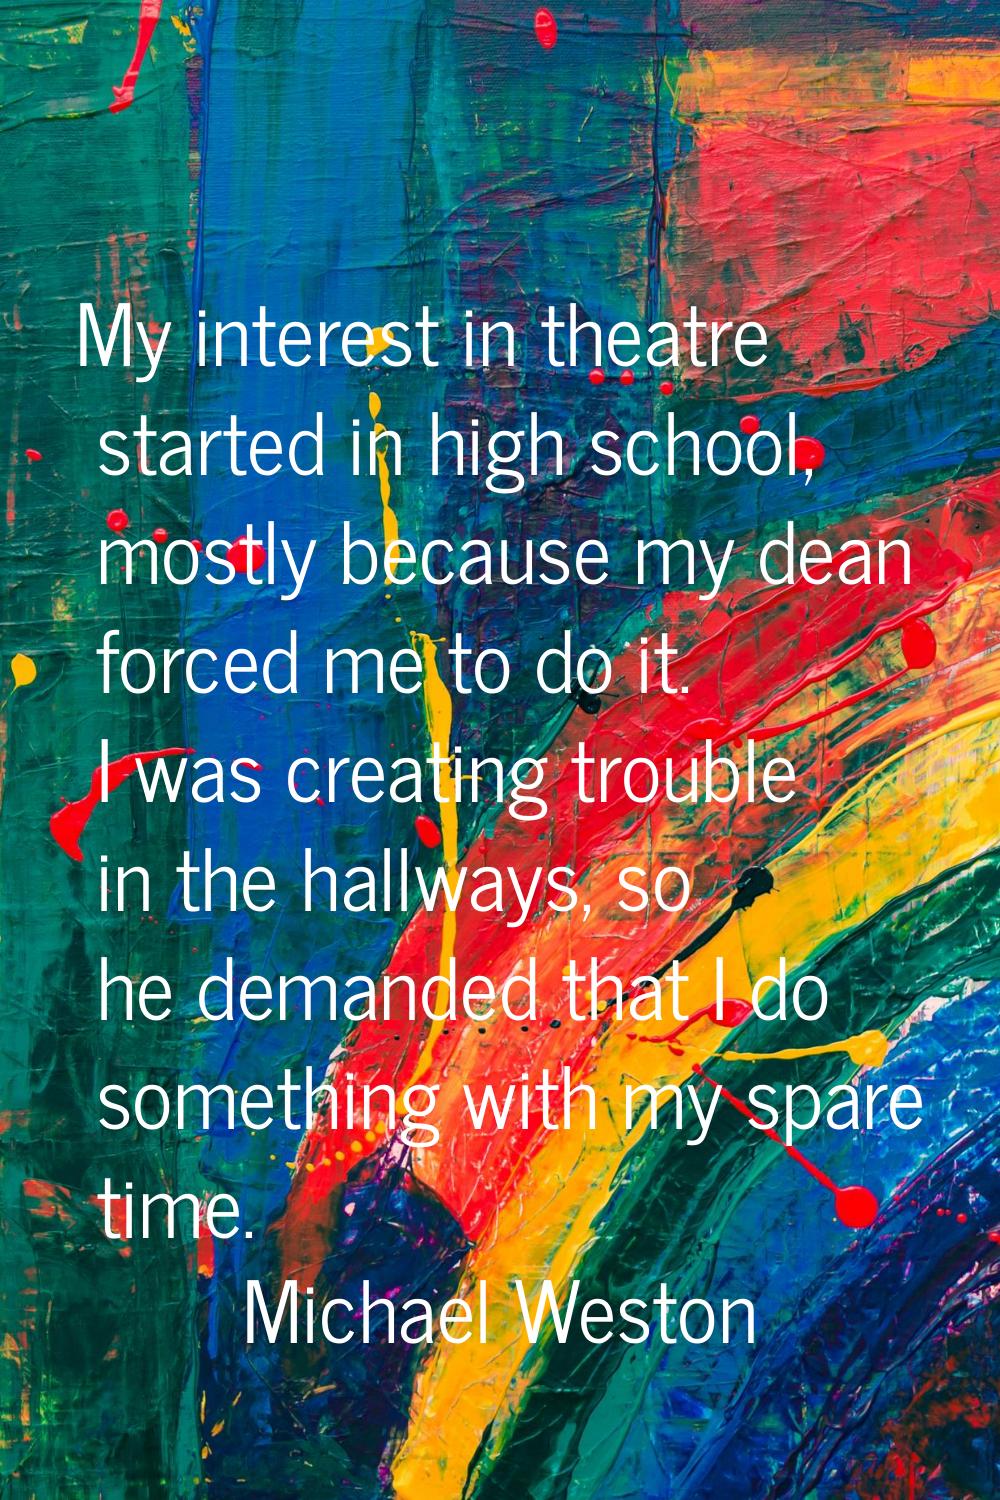 My interest in theatre started in high school, mostly because my dean forced me to do it. I was cre